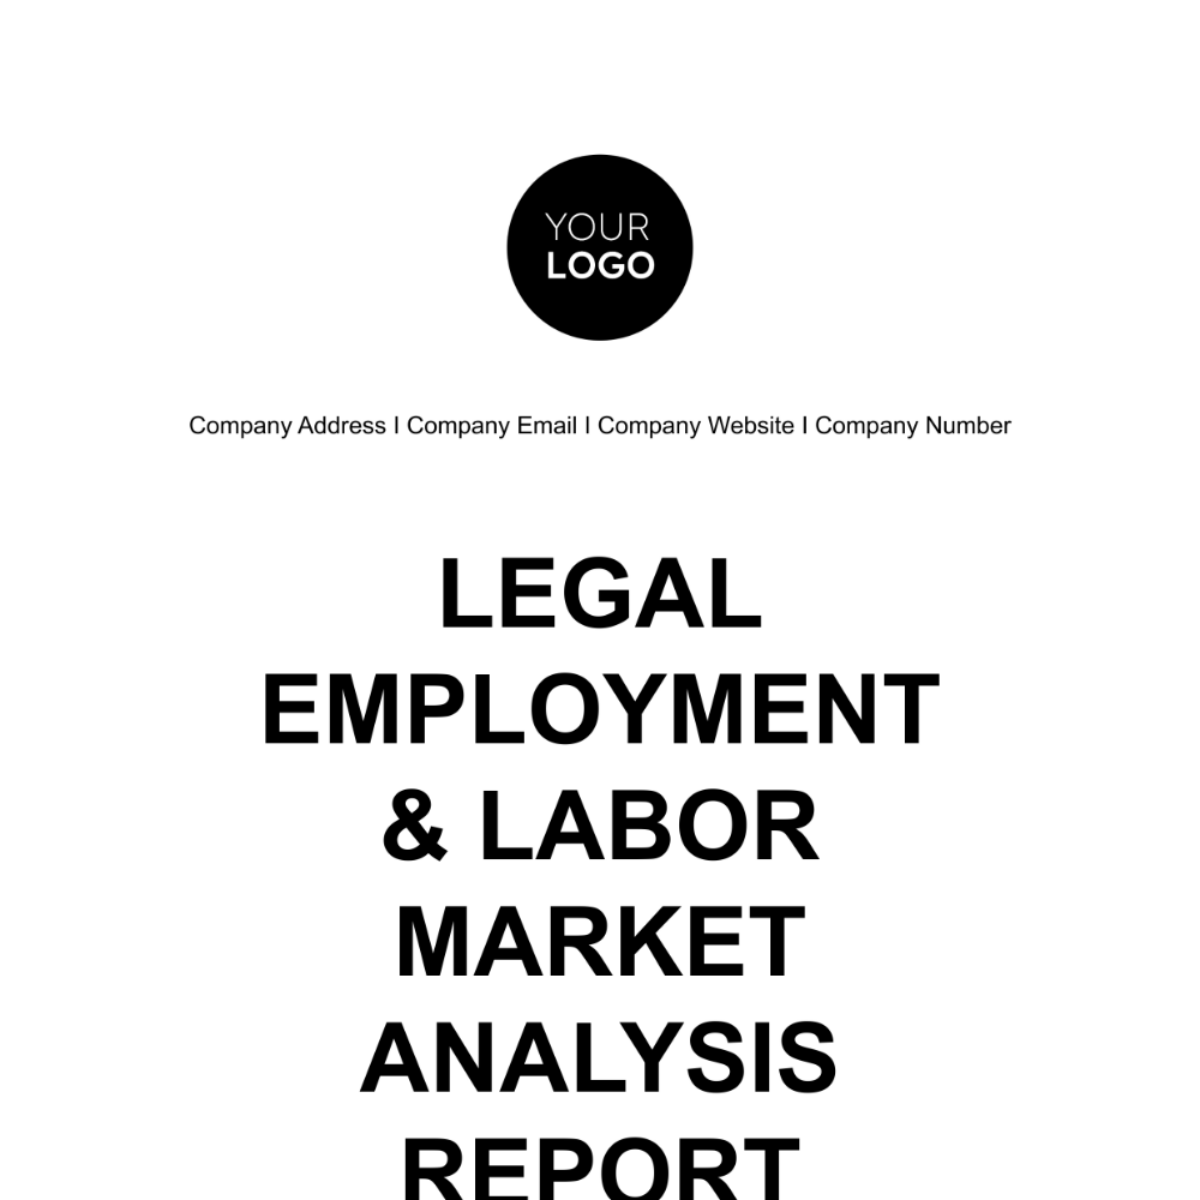 Legal Employment & Labor Market Analysis Report Template